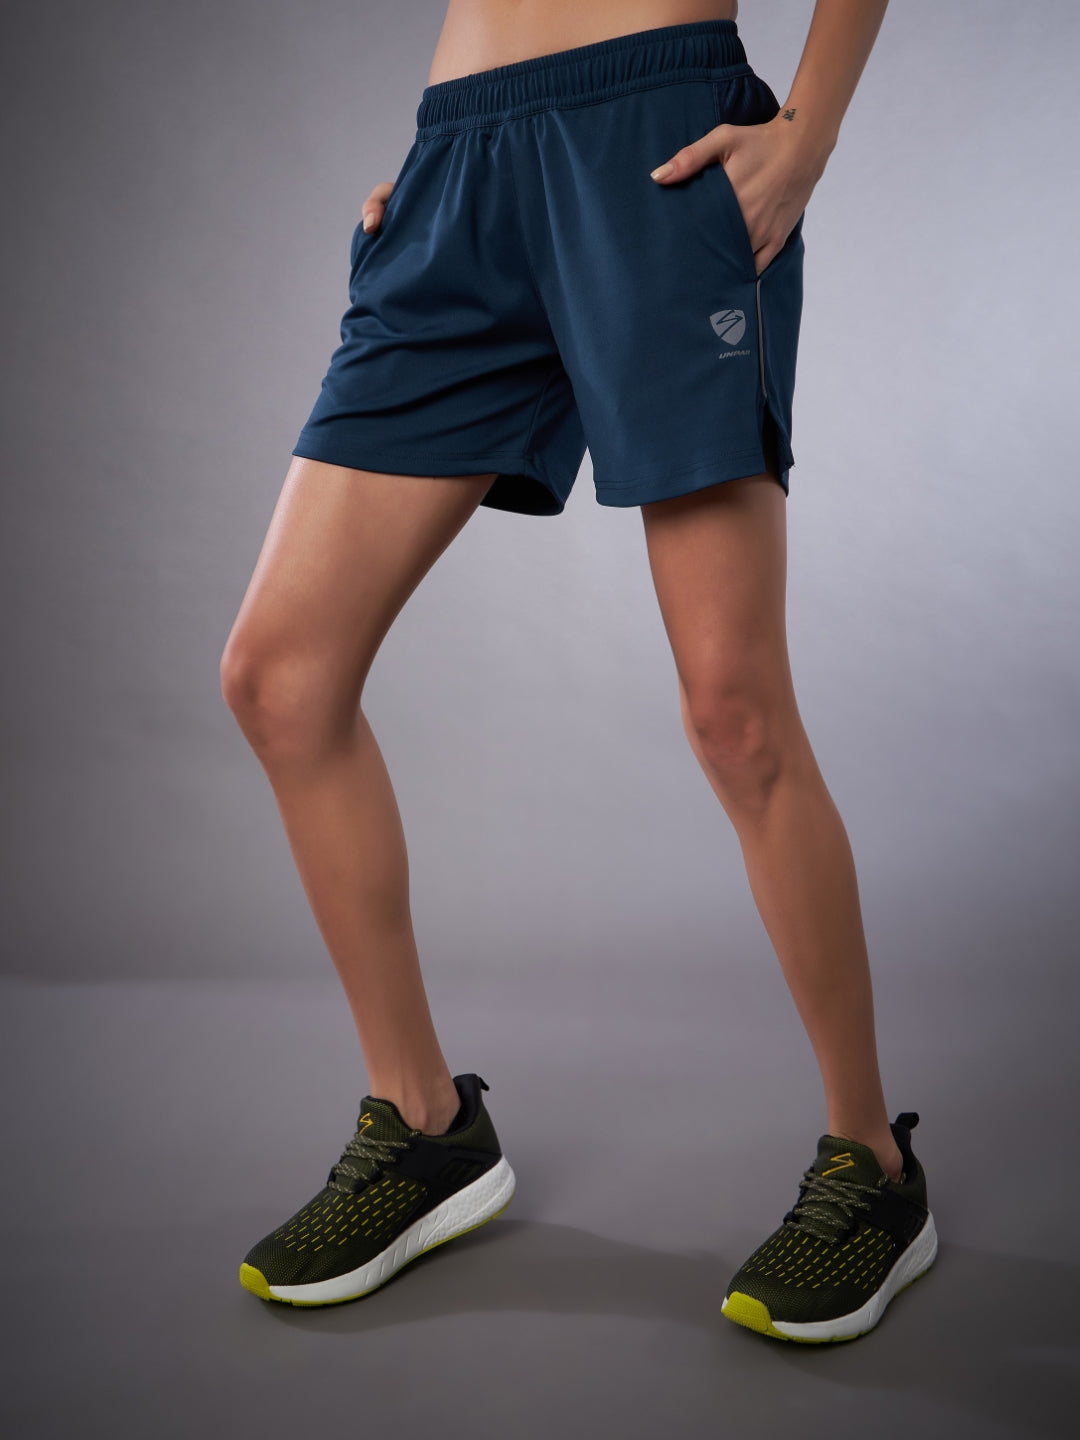 Women's Solid Navy Shorts